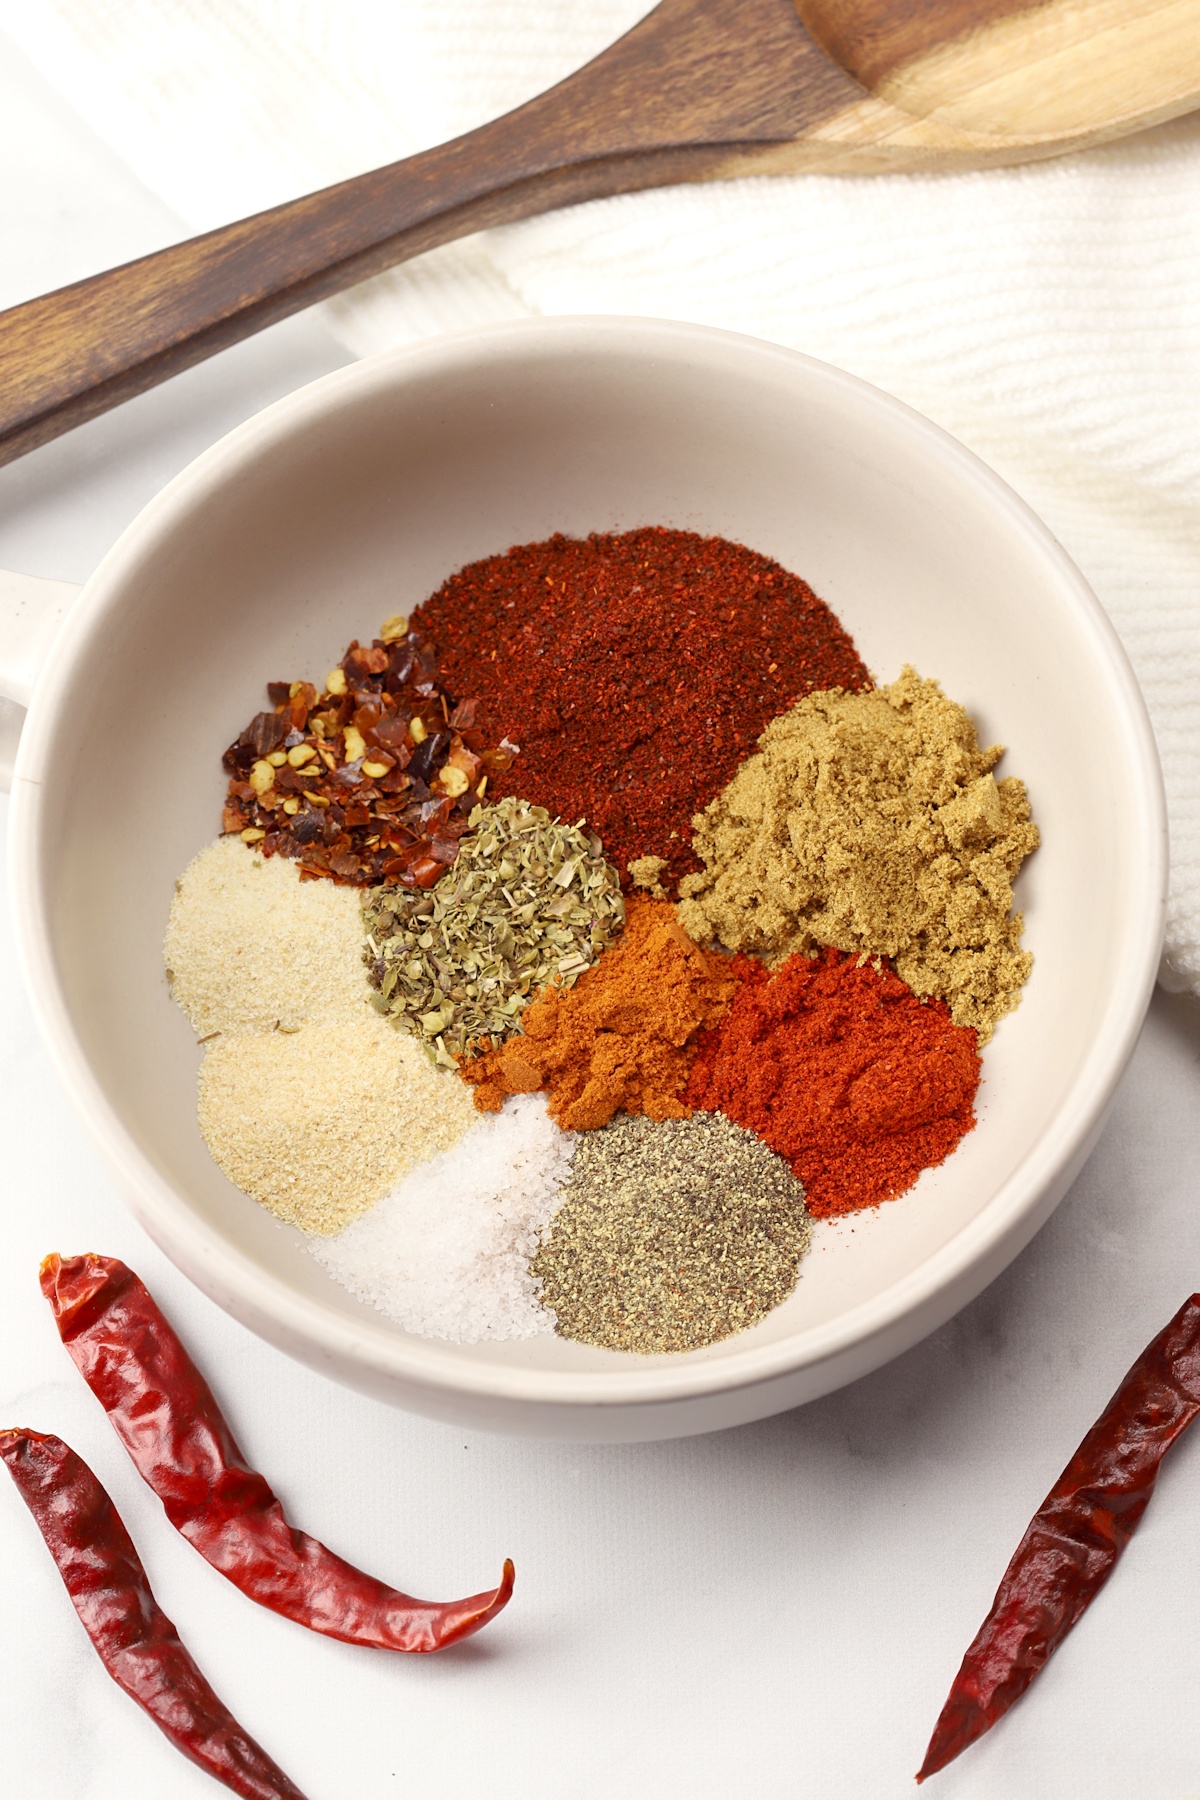 A bowl filled with various spices.